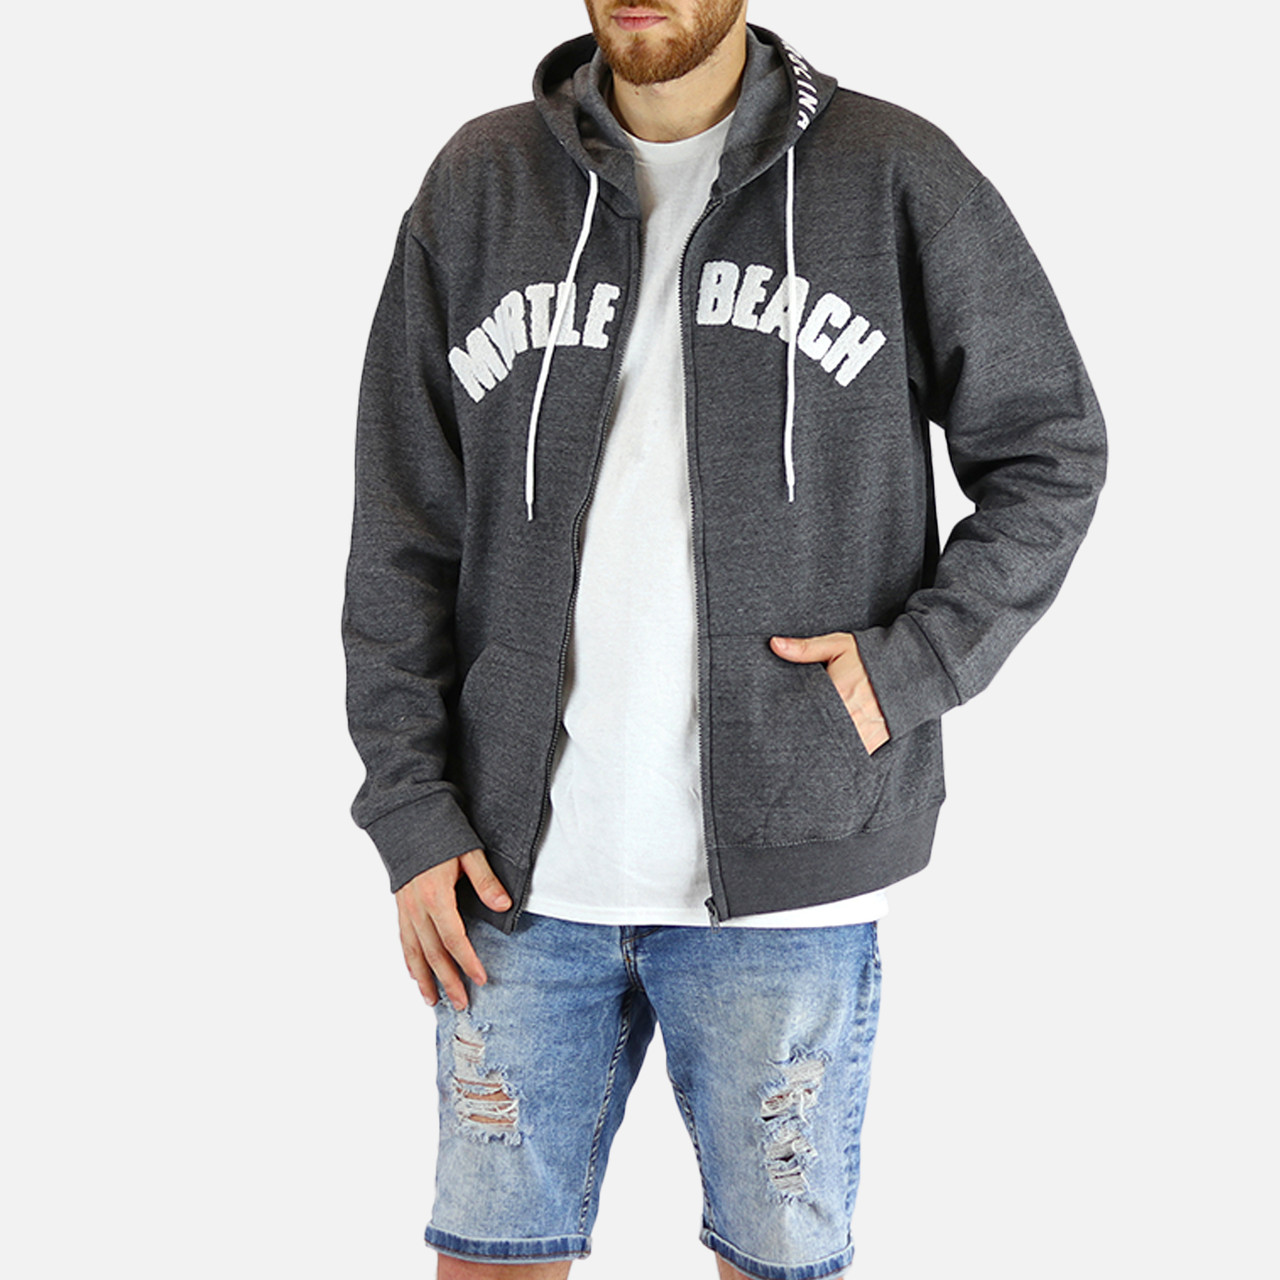 Fluff Embroidery Zipper Hoodie Promo Charcoal Grey